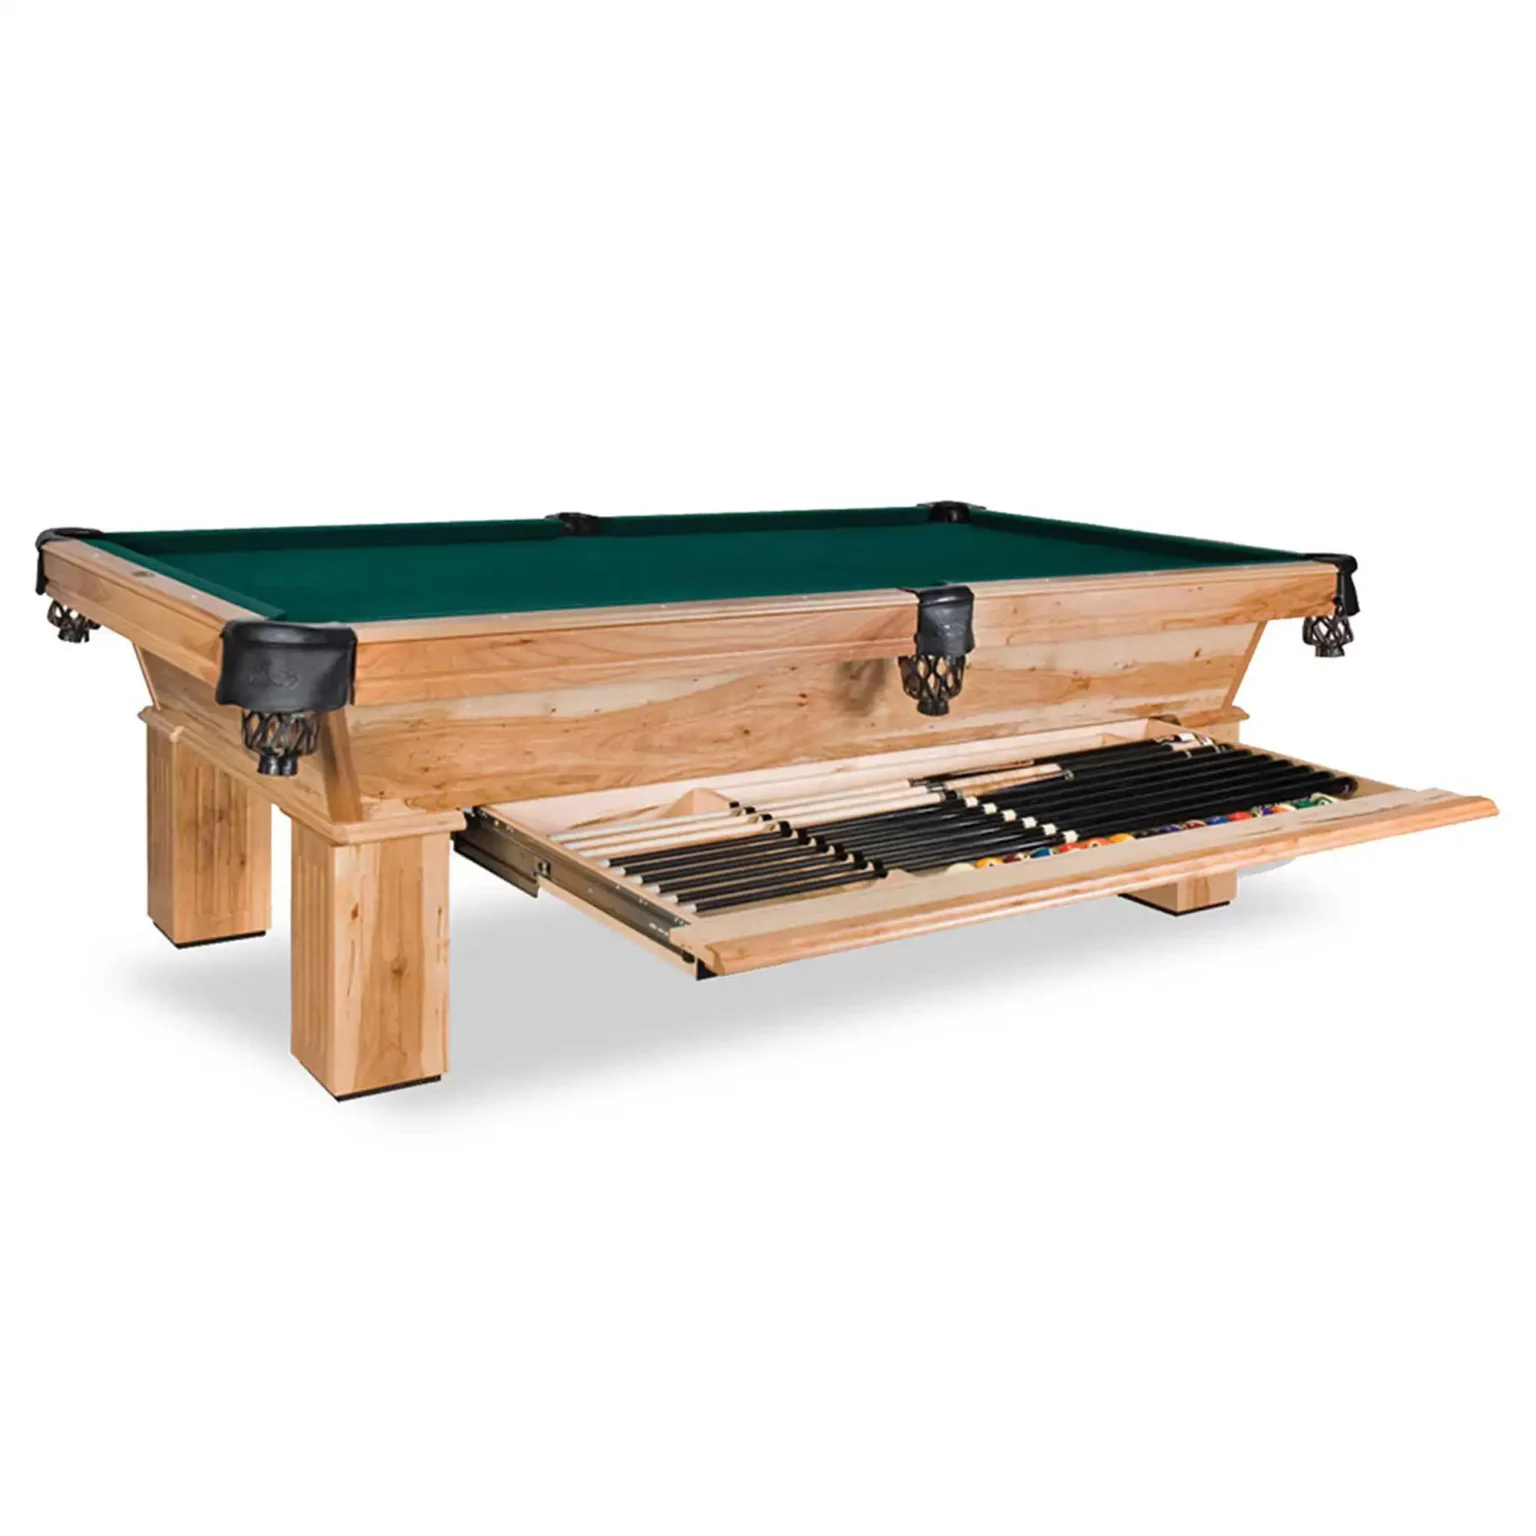 Olhausen Southern pool table